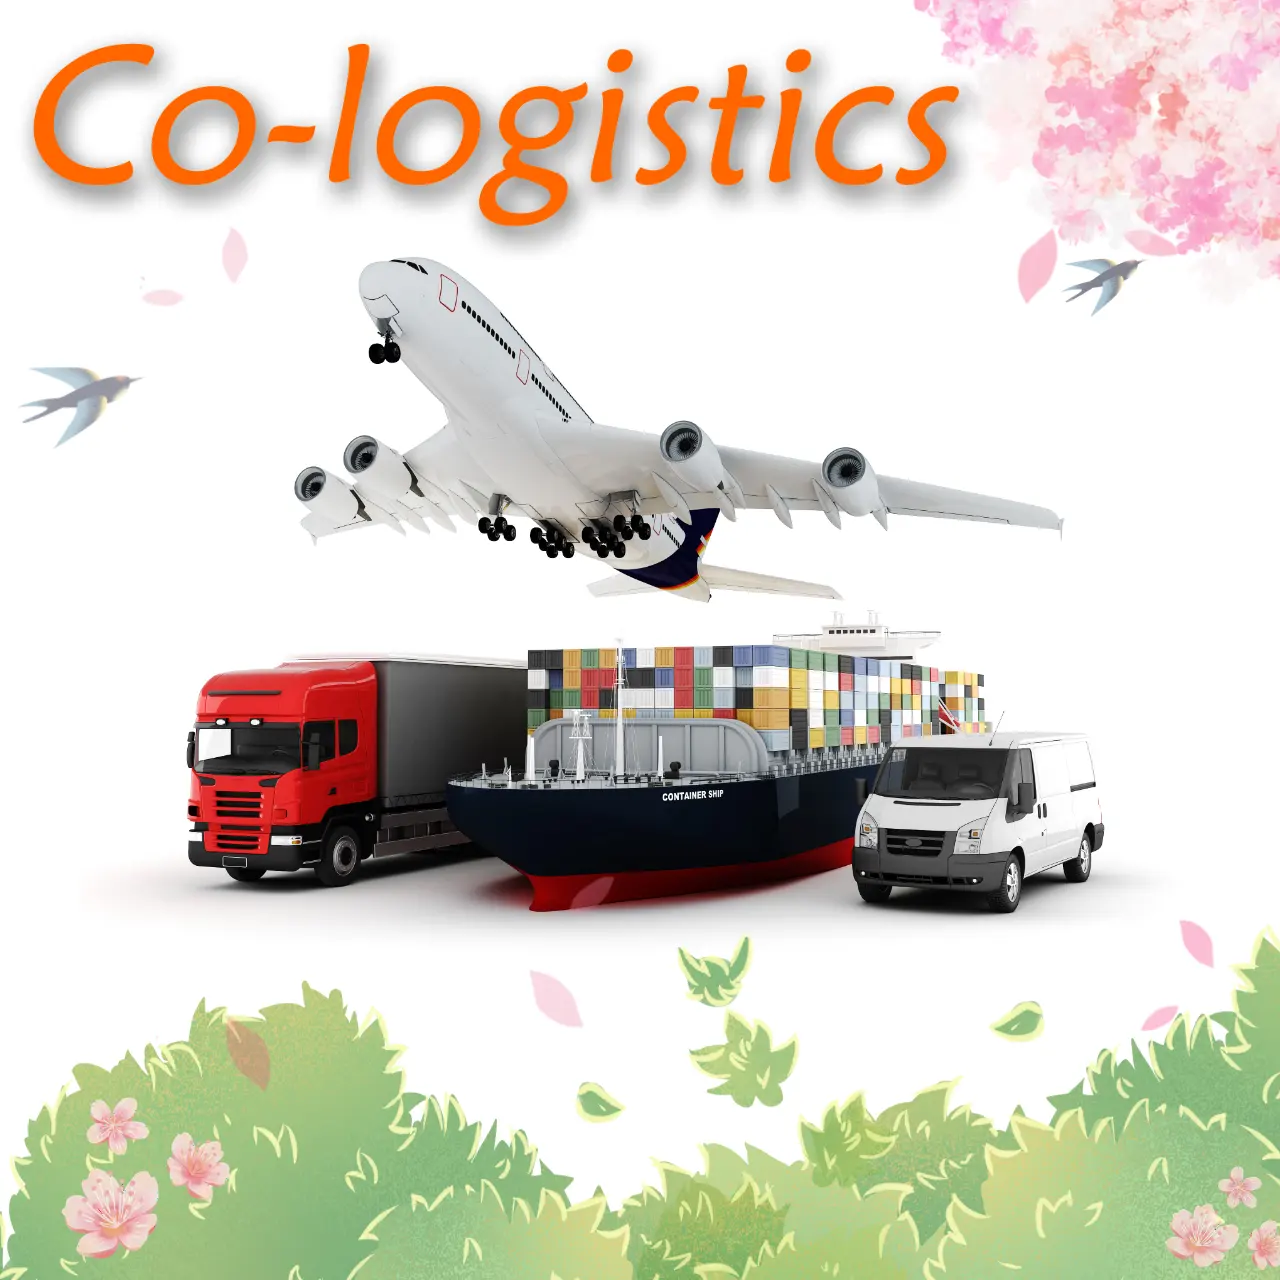 DDP truck service to Laos Thailand Myanmar Cambodia Bangladesh land carriage service with collection from different suppliers